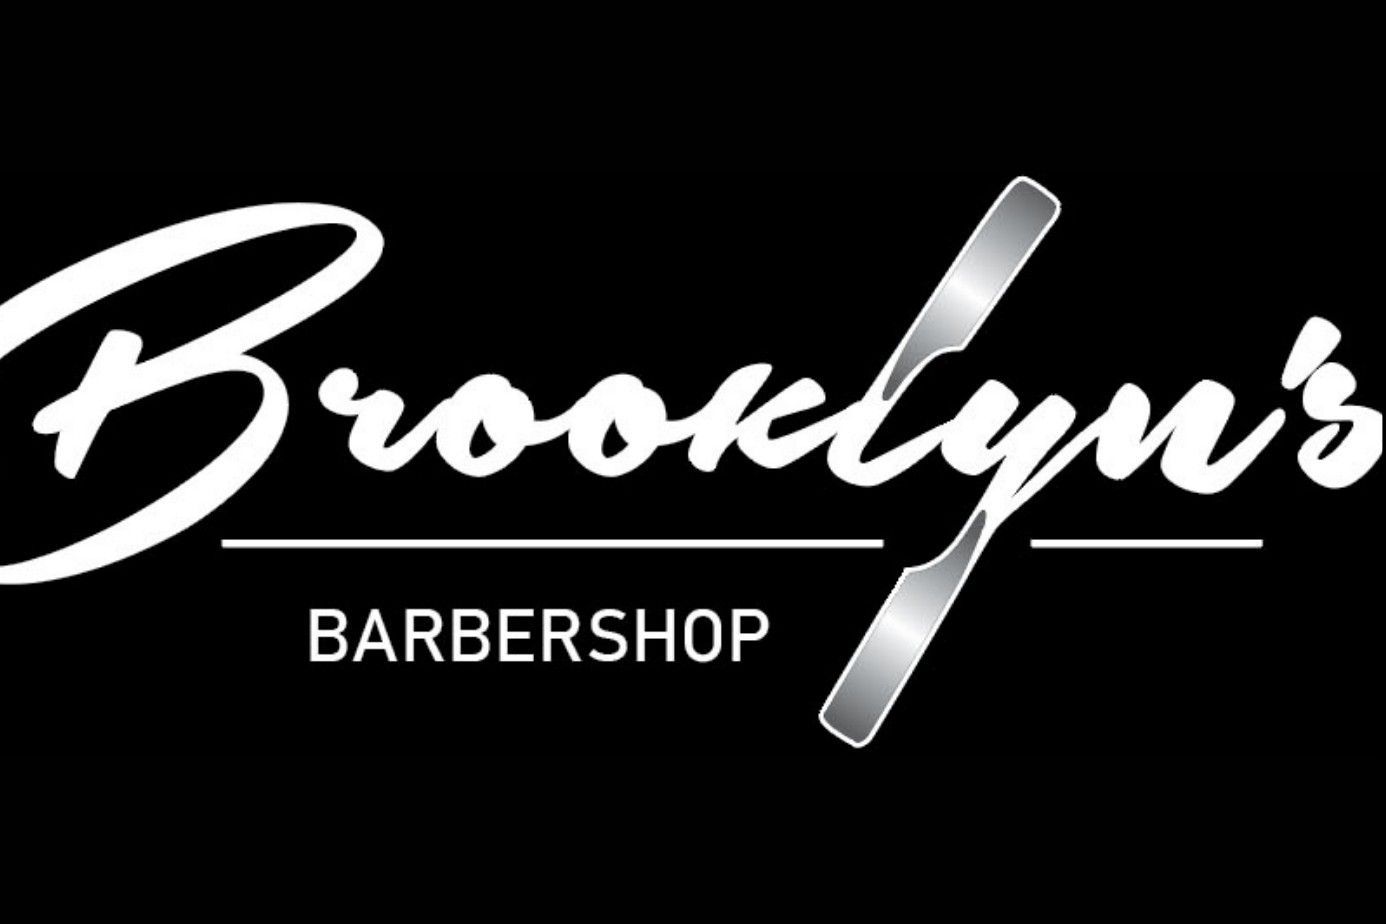 Brooklyn The Barber - McAllen - Book Online - Prices, Reviews, Photos